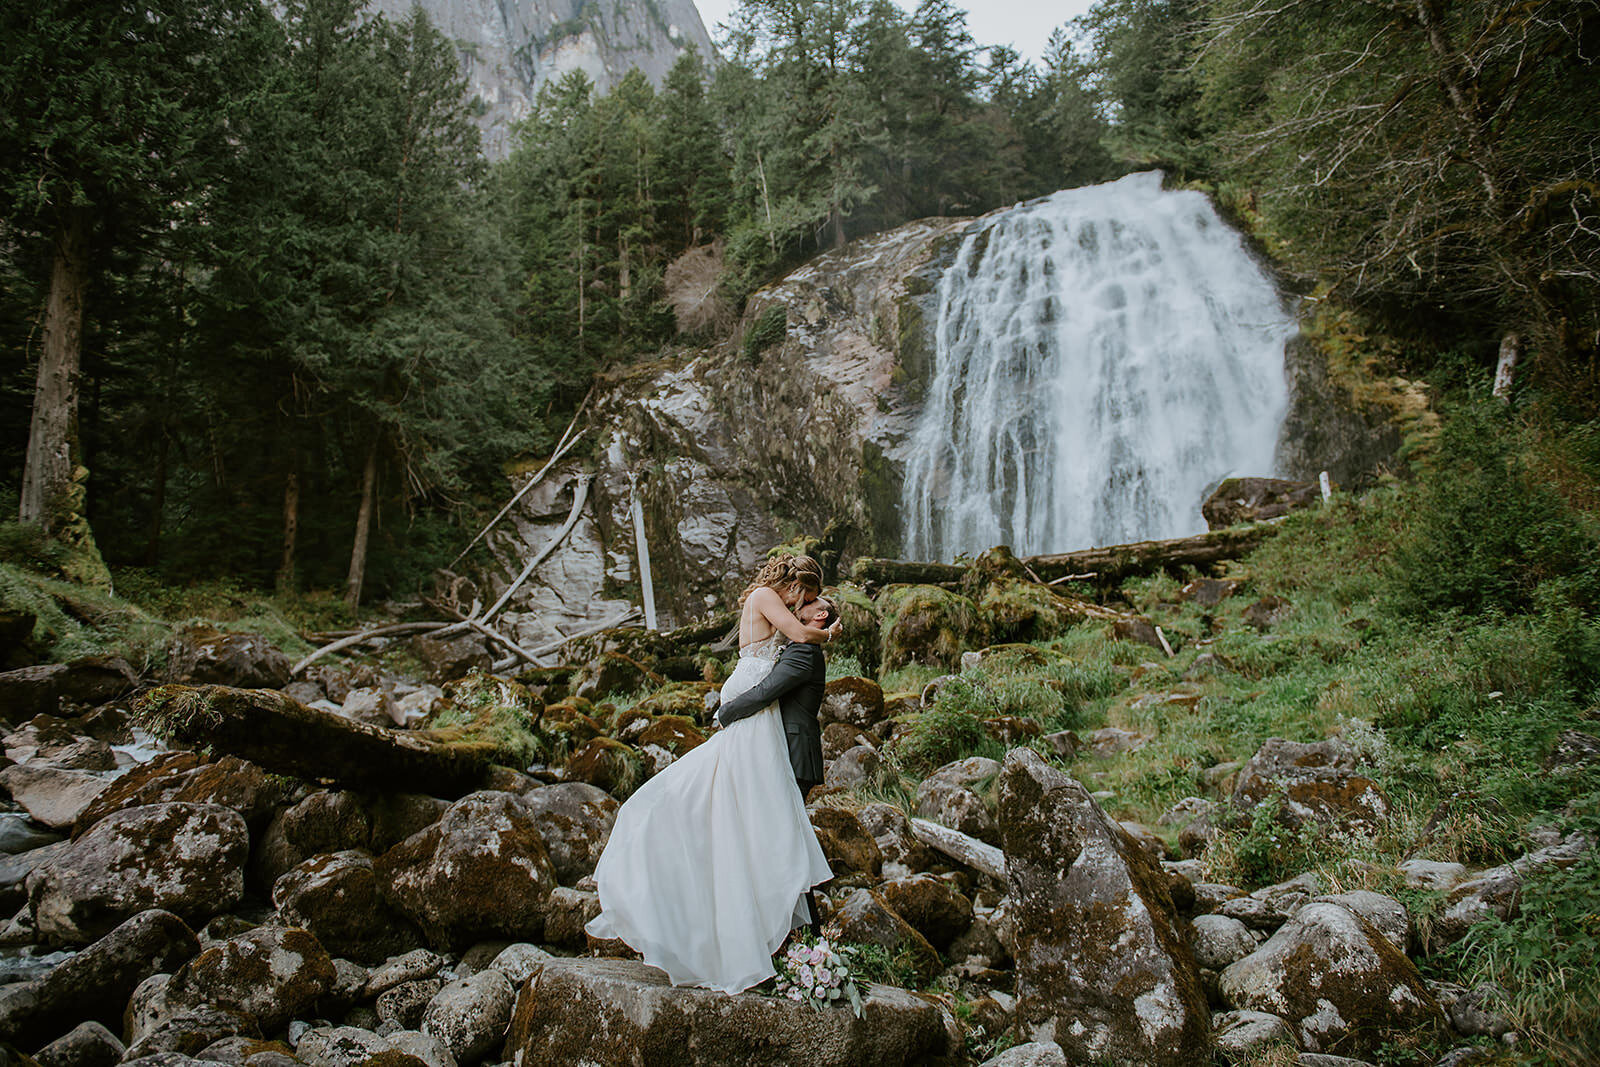 Bride and Groom in front beautiful Chatterbox Falls in British Columbia Canada at their romantic elopement. Couple sharing first kiss in the mist from the majestic waterfall.